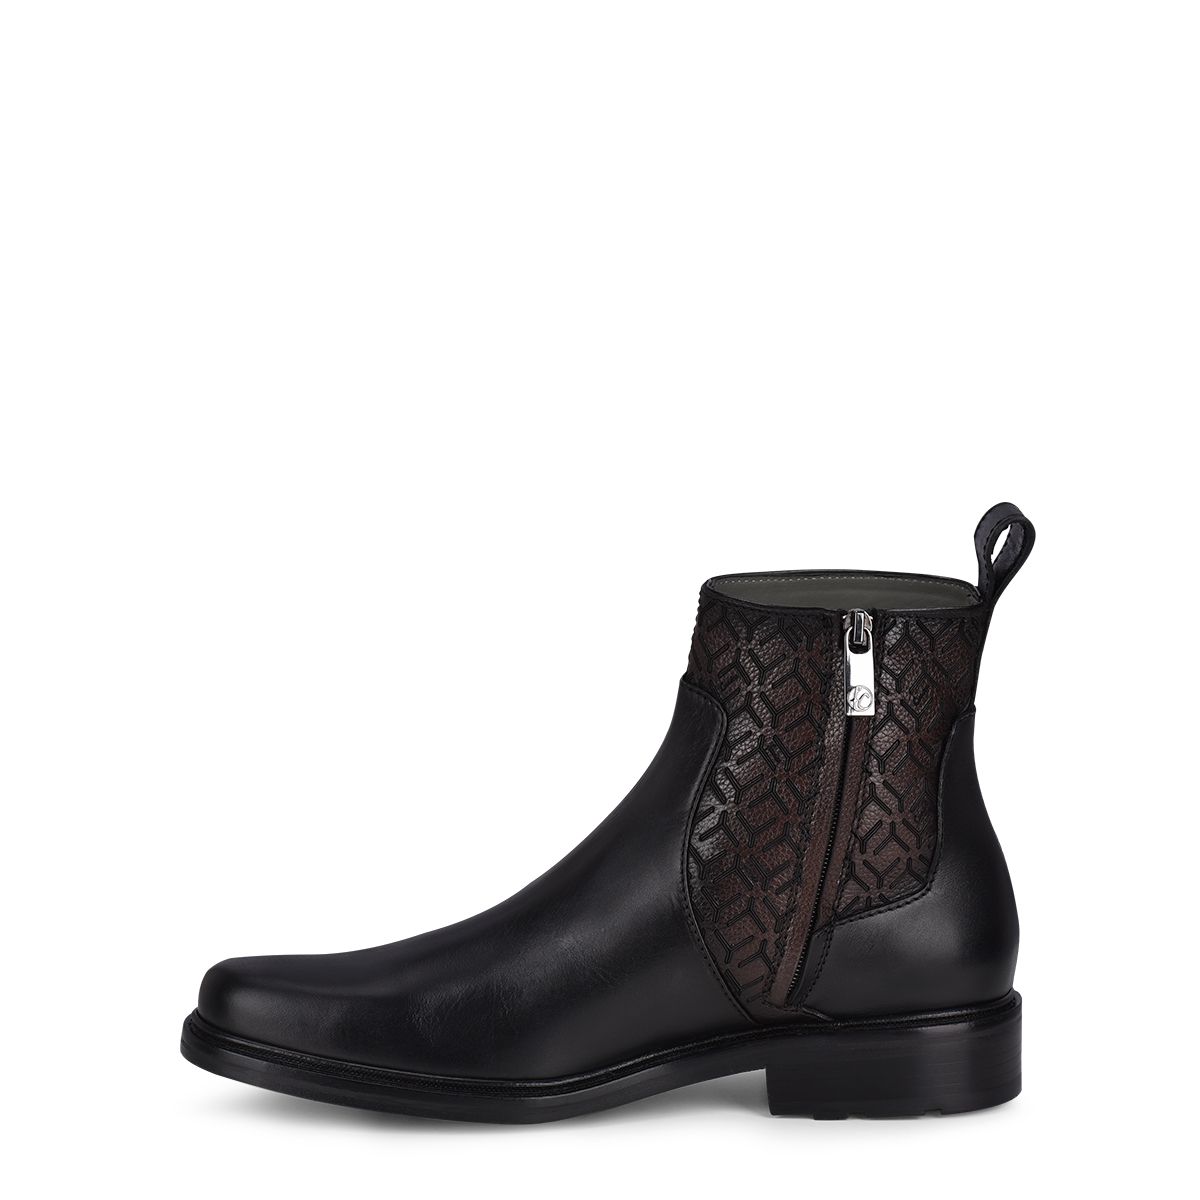 Black hand-painted engraved leather boots - 1J2IRS - Cuadra Shop